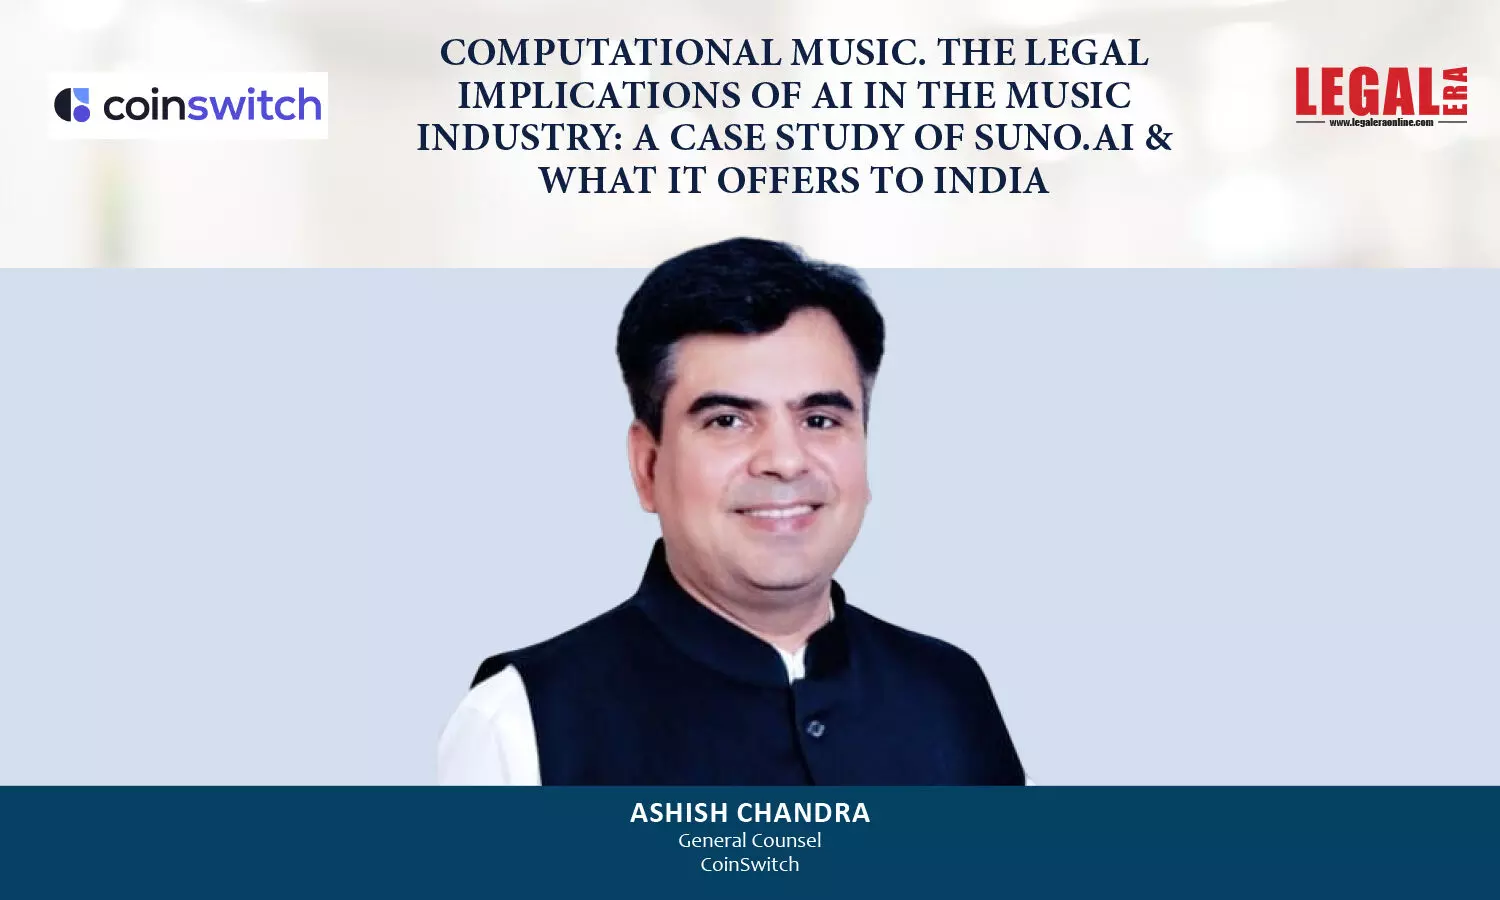 Computational Music. The Legal Implications Of AI In the Music Industry: A Case Study Of Suno.ai & what It offers To India